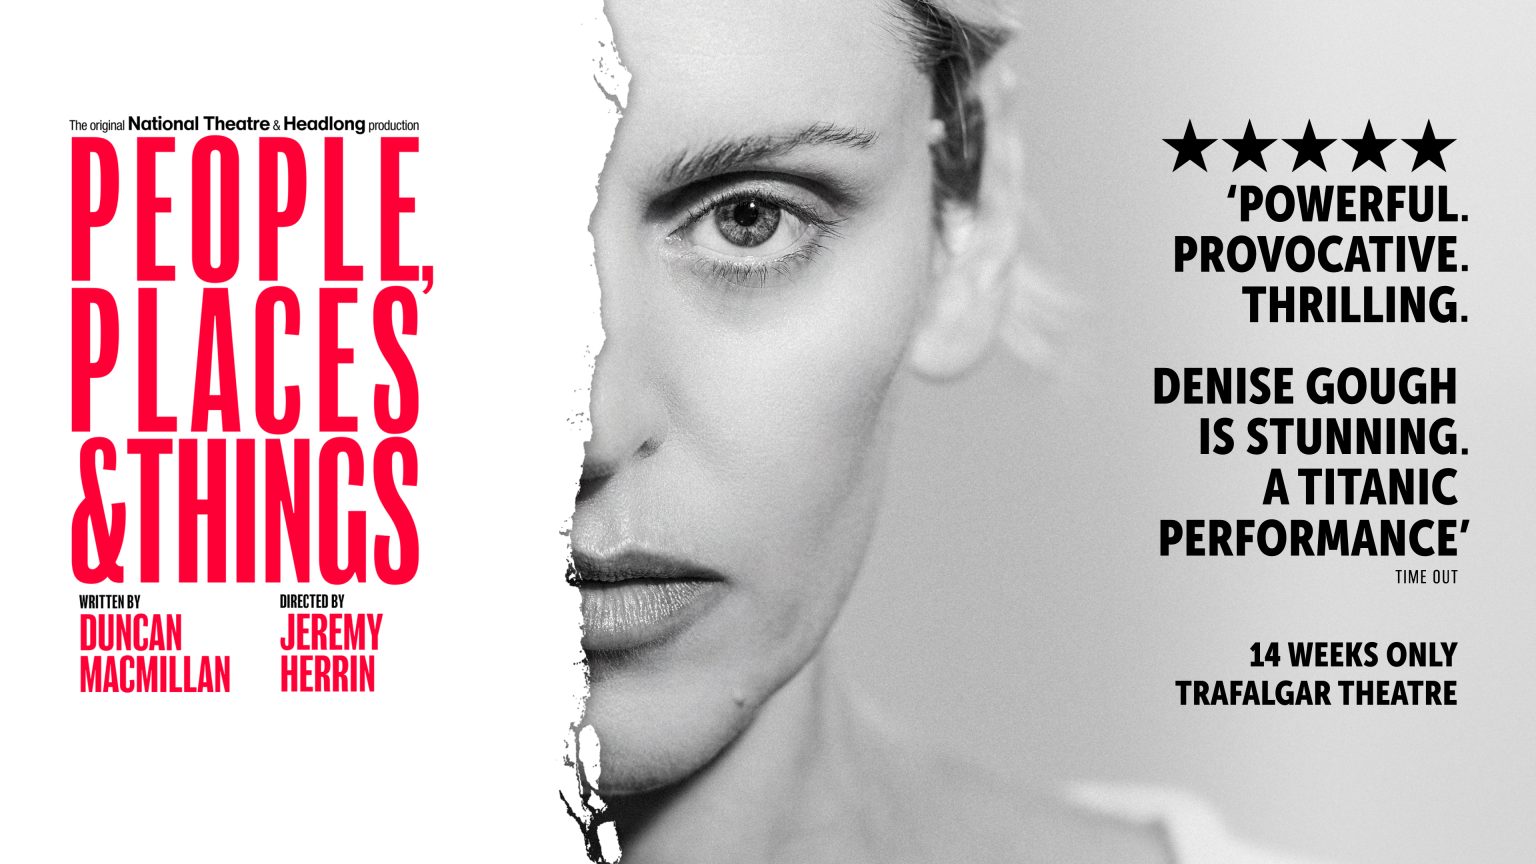 People, Places and Things starring Denise Gough, directed by Jeremy Herrin